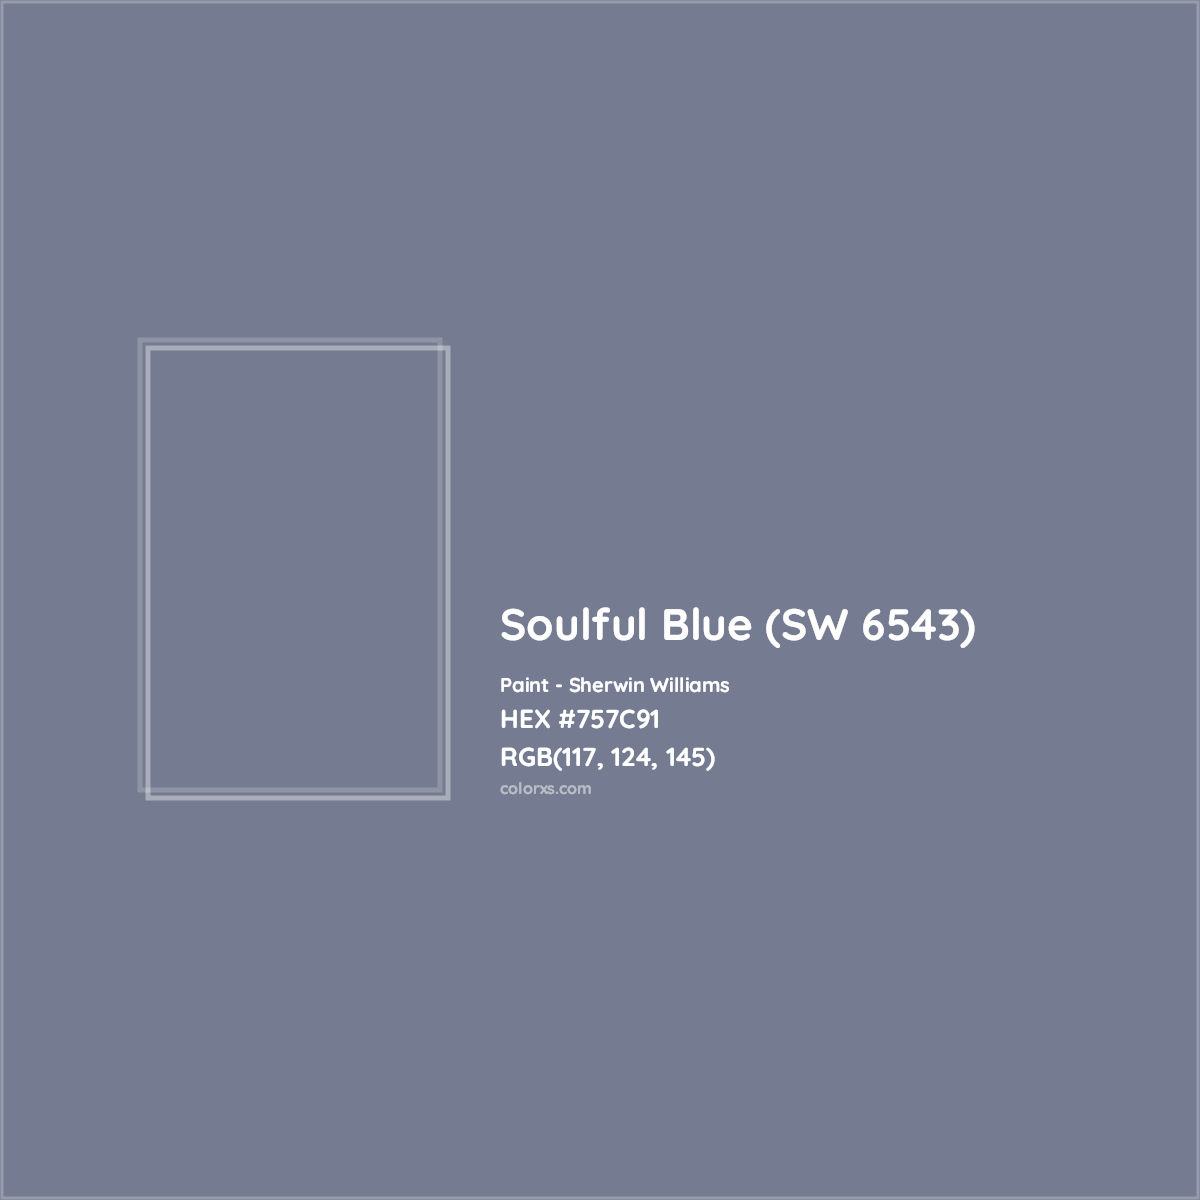 HEX #757C91 Soulful Blue (SW 6543) Paint Sherwin Williams - Color Code